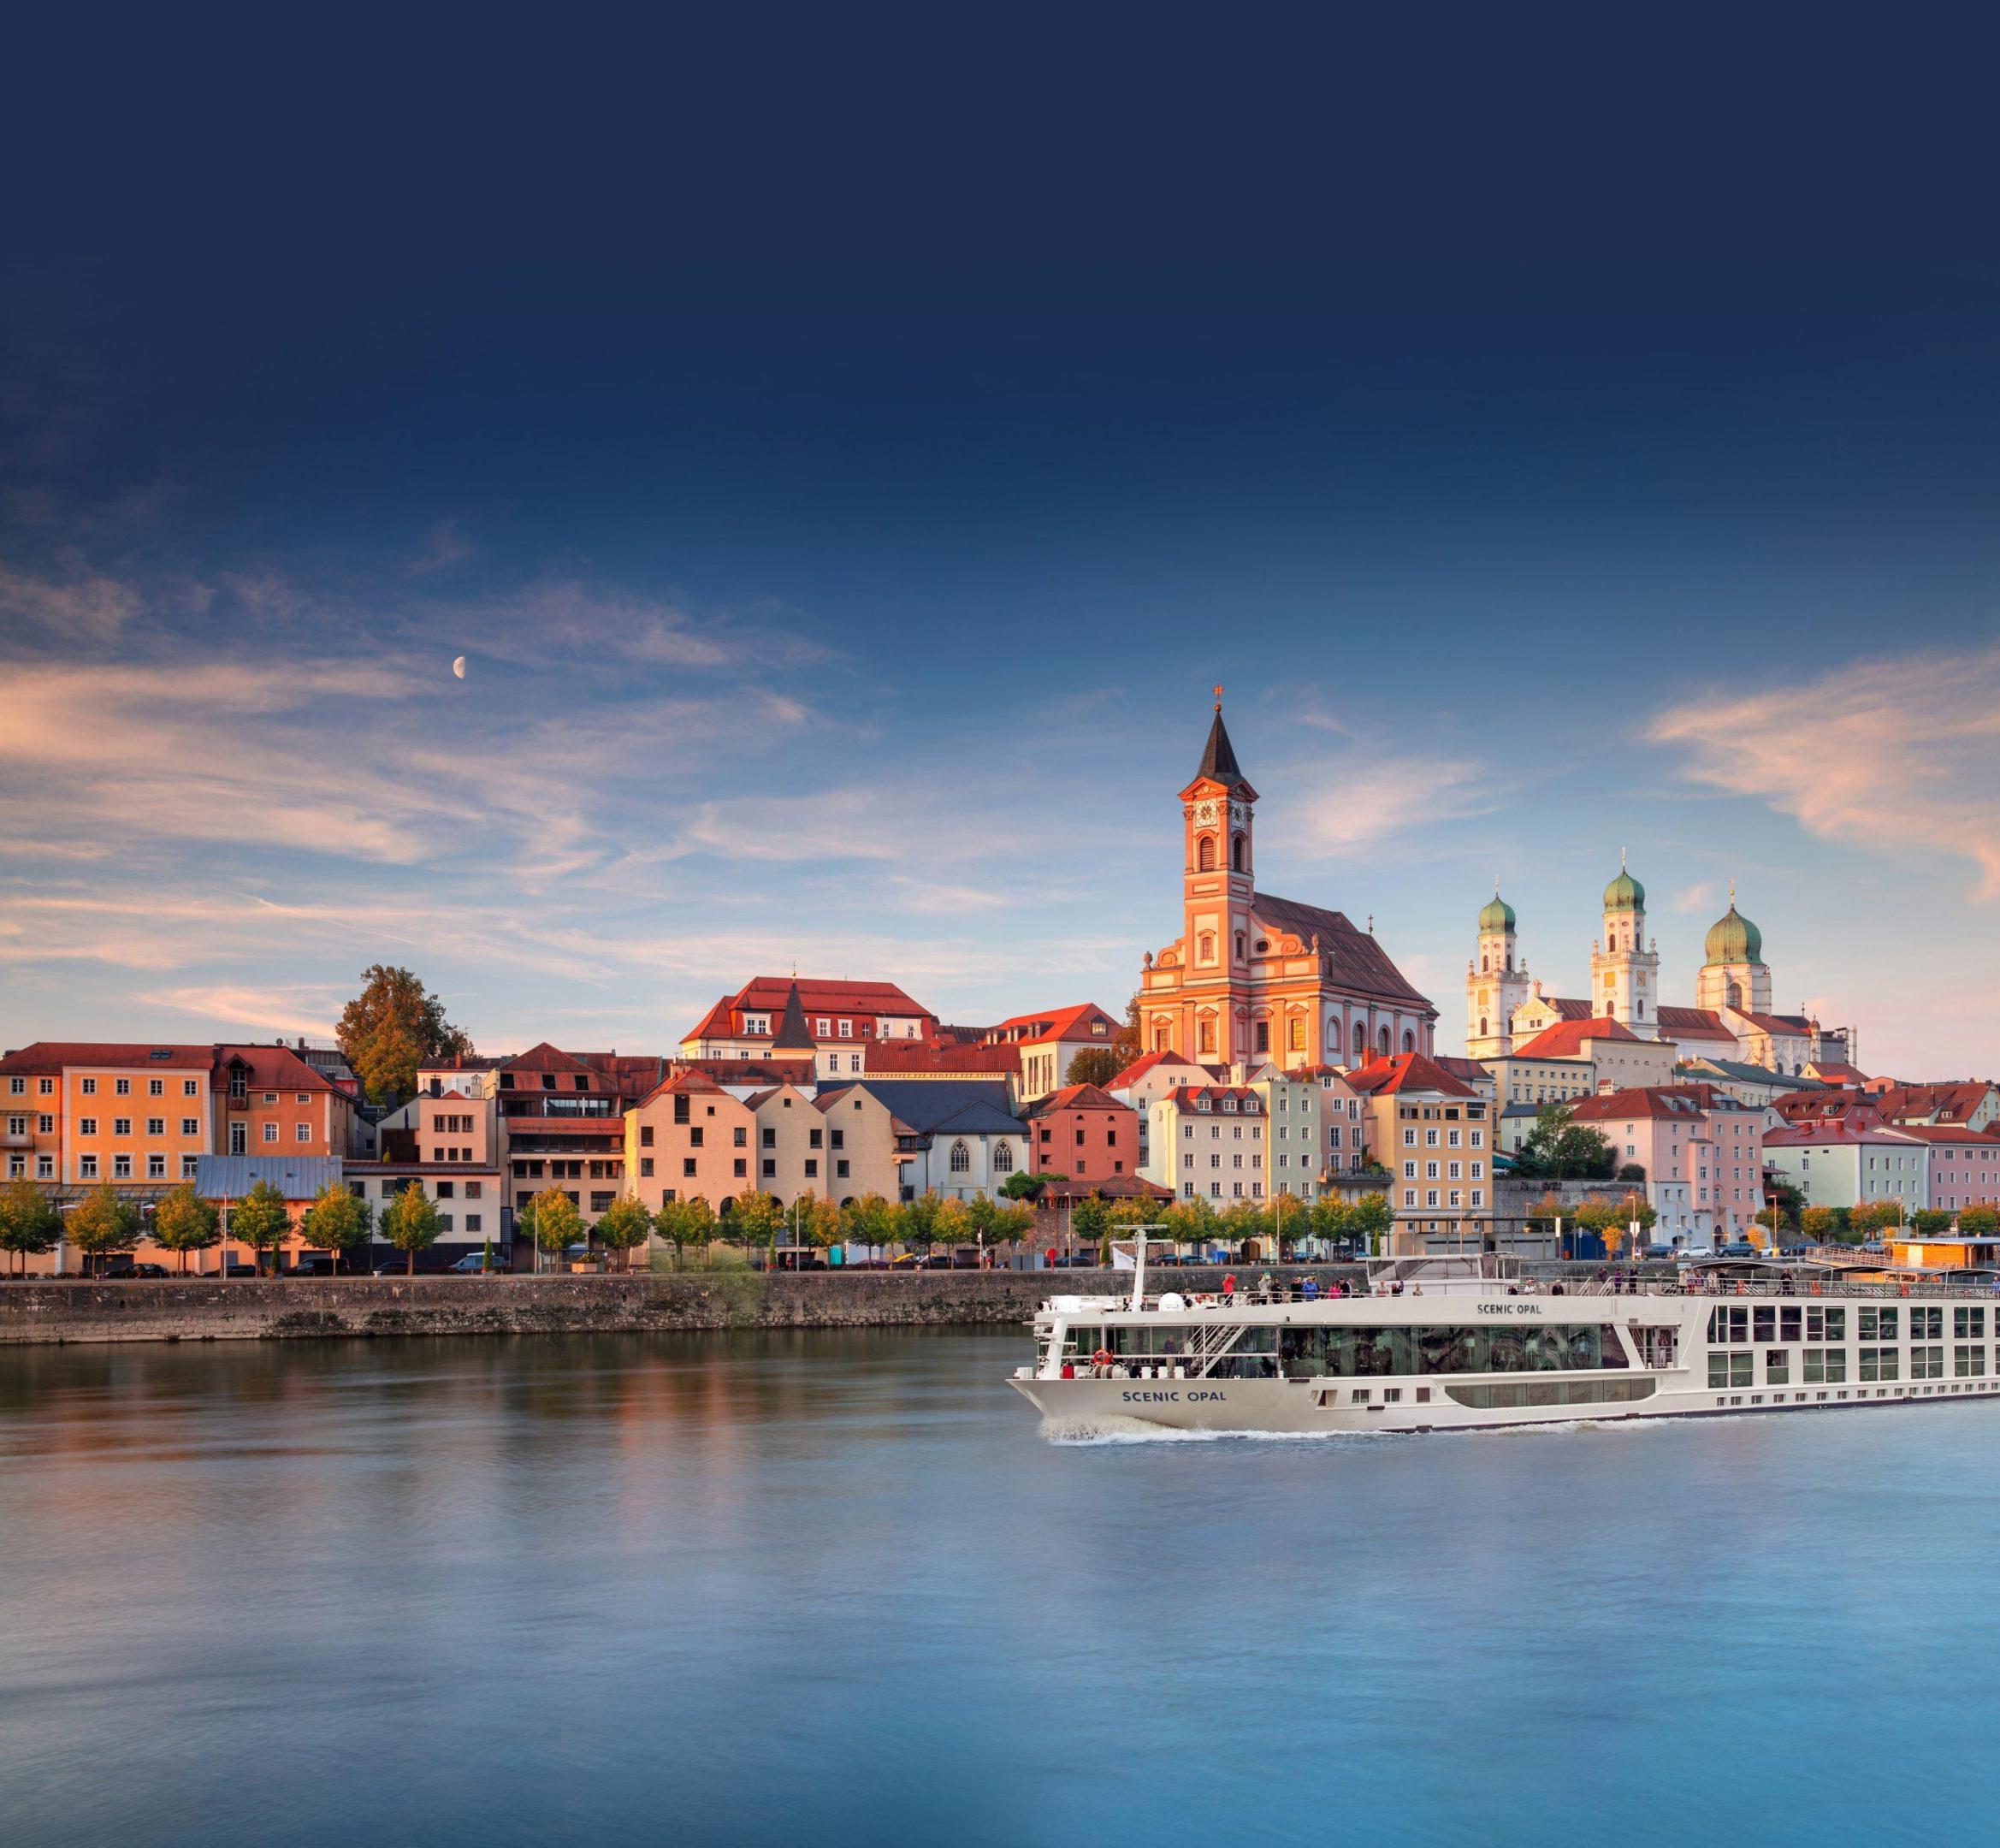 Jewels of Europe Scenic River Cruise - Save up to $5,000 per couple